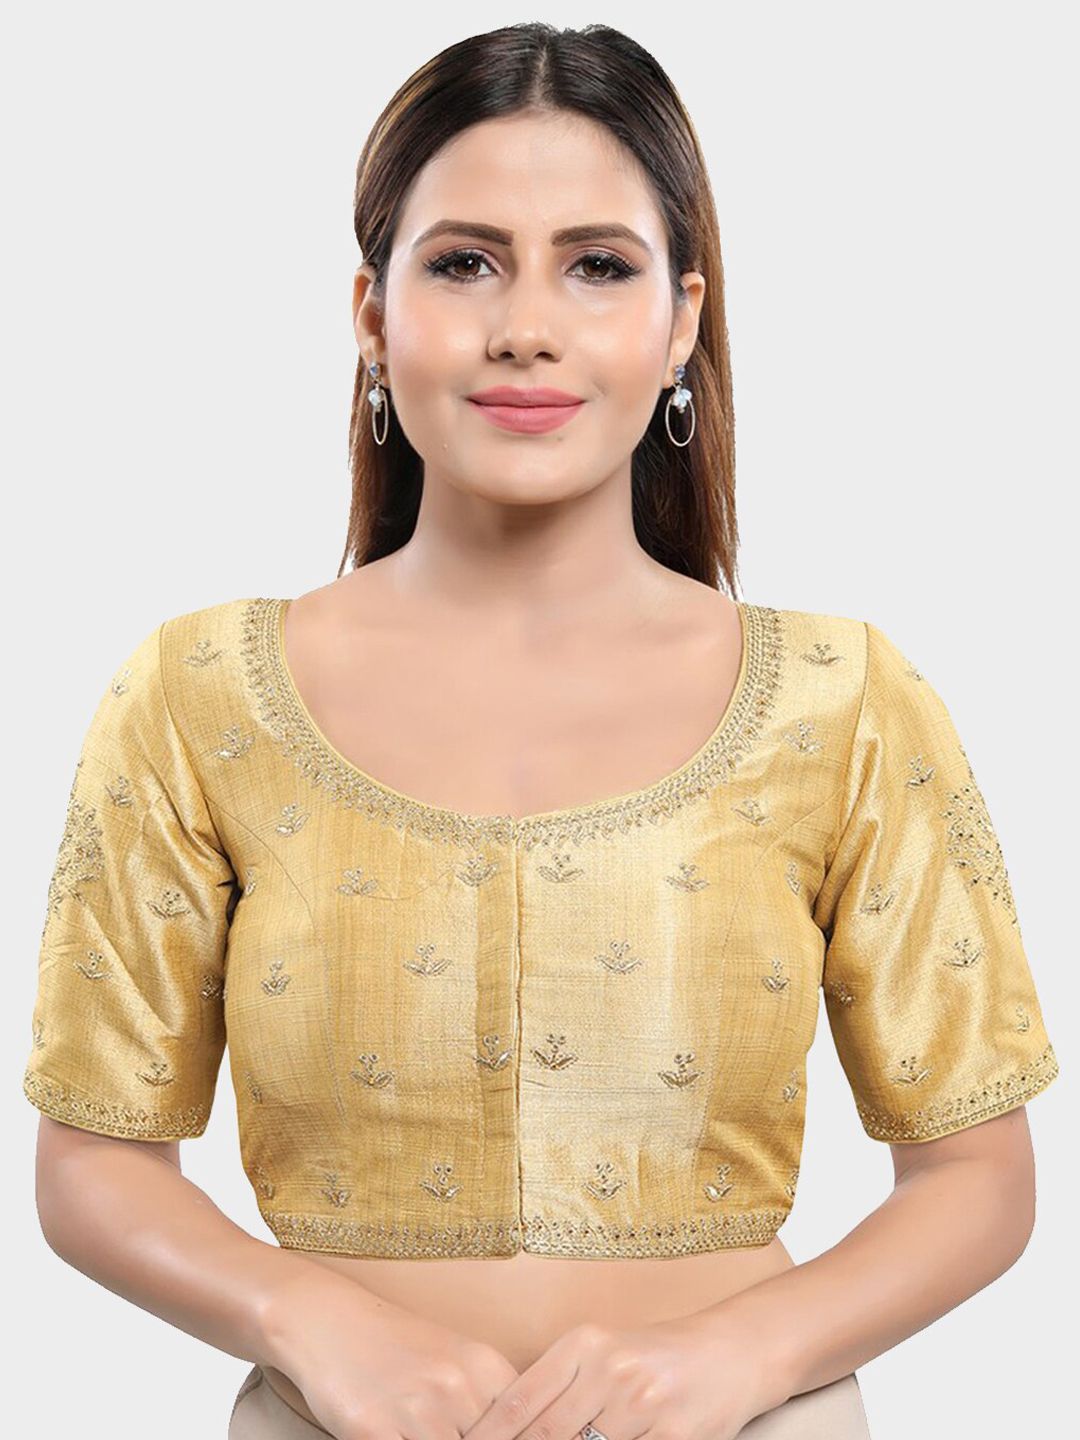 SALWAR STUDIO Women Gold-Toned Embroidered Saree Blouse Price in India